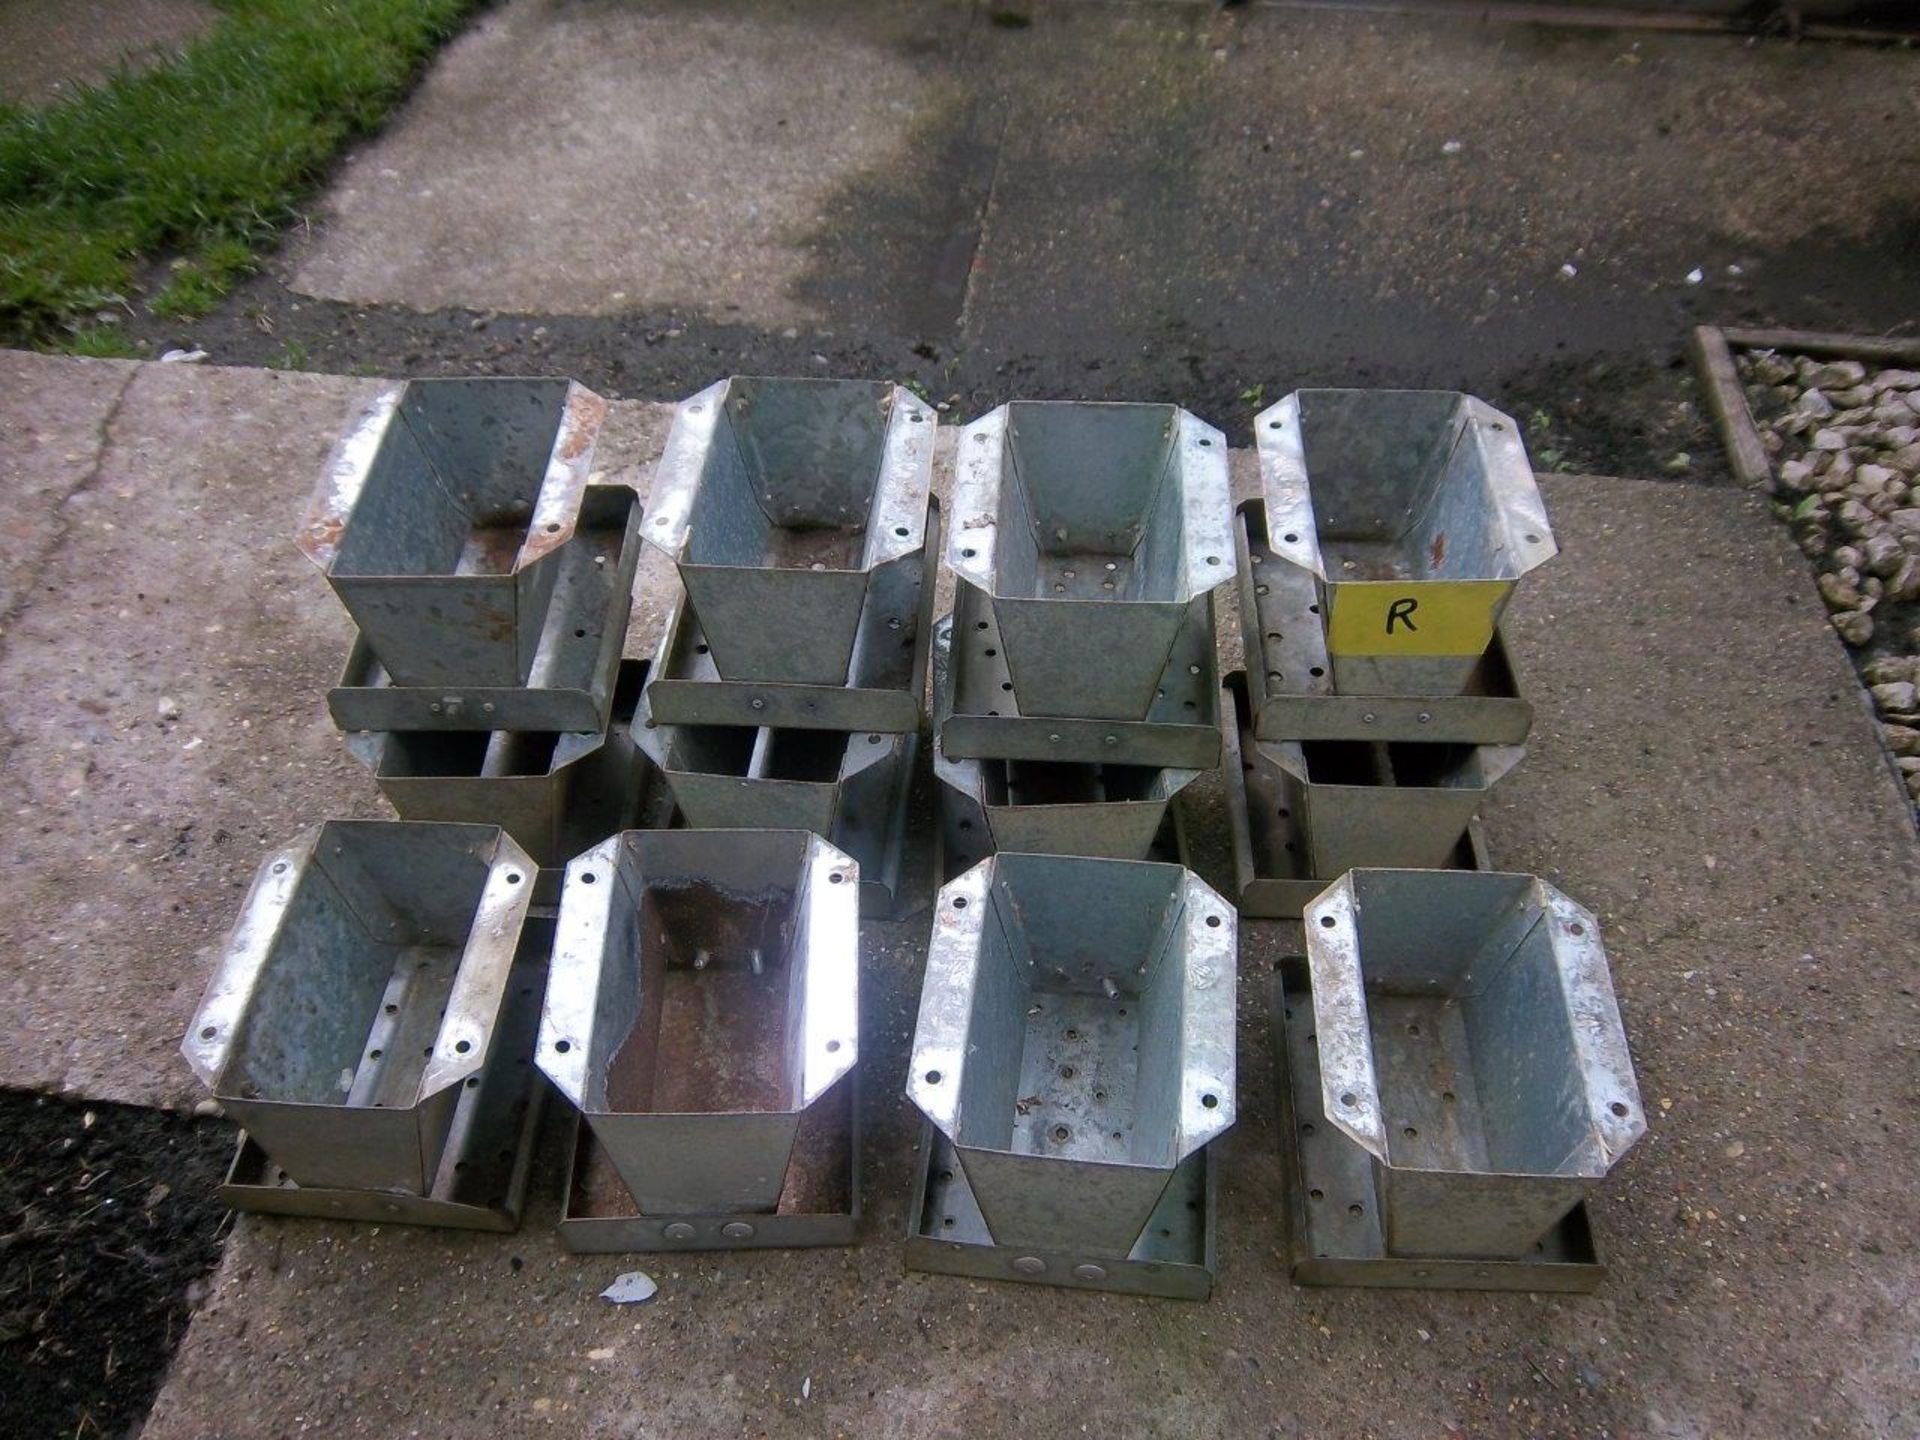 12 x Pheasant Feeder Pans (Used). Stored near Beccles, Suffolk. No VAT on this lot.